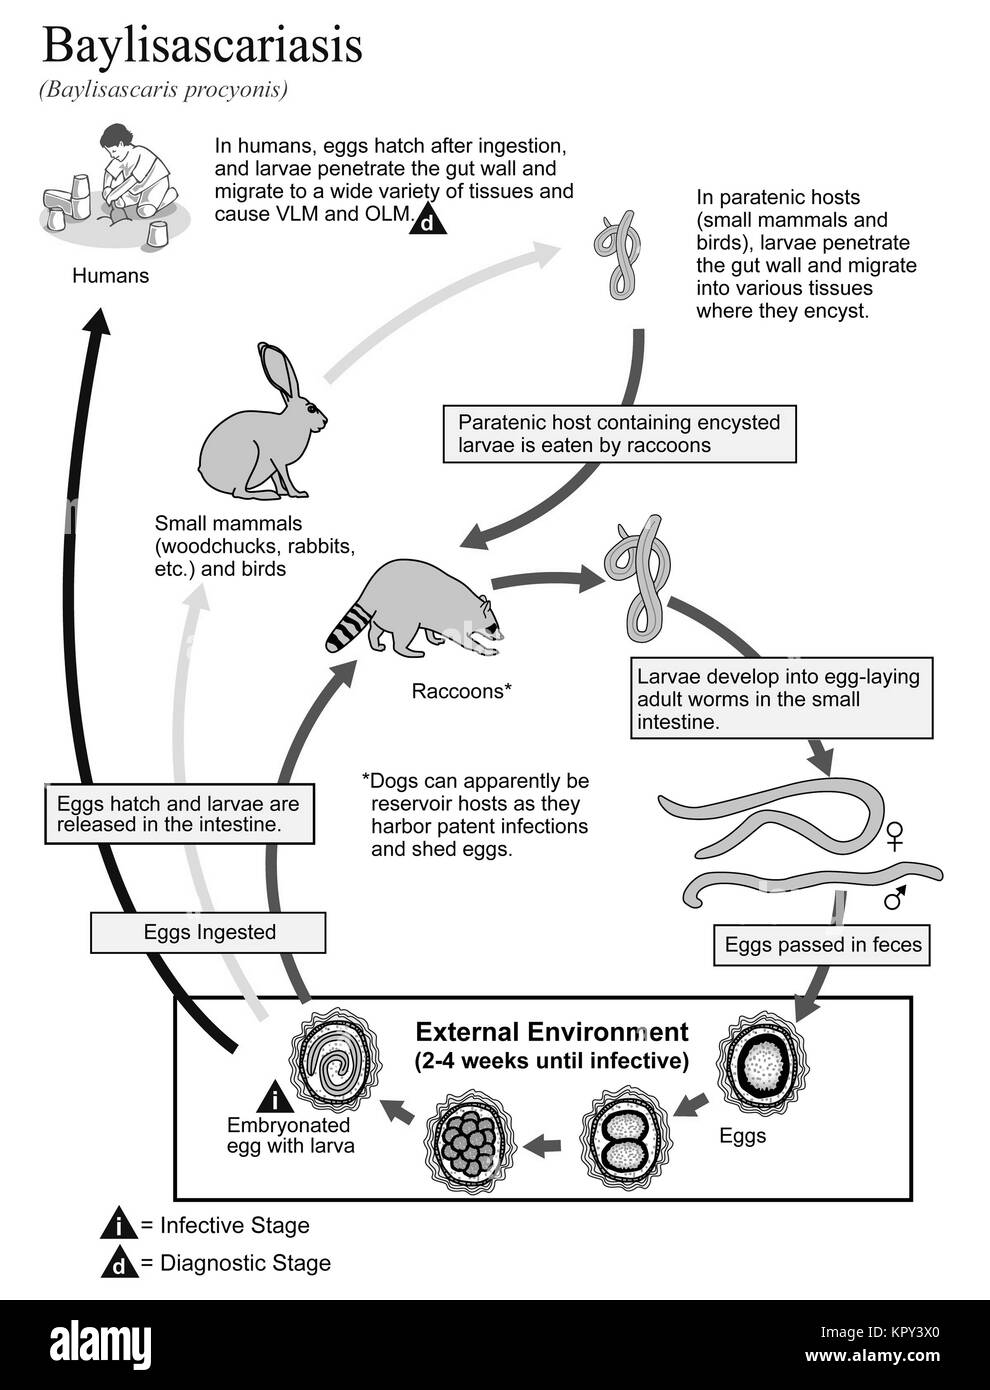 Illustrated diagram showing the life cycle of Baylisascaris procyonis, the causal agent of Baylisascariasis, 2002. Image courtesy CDC/Alexander J. da Silva, PhD/Melanie Moser. Stock Photo